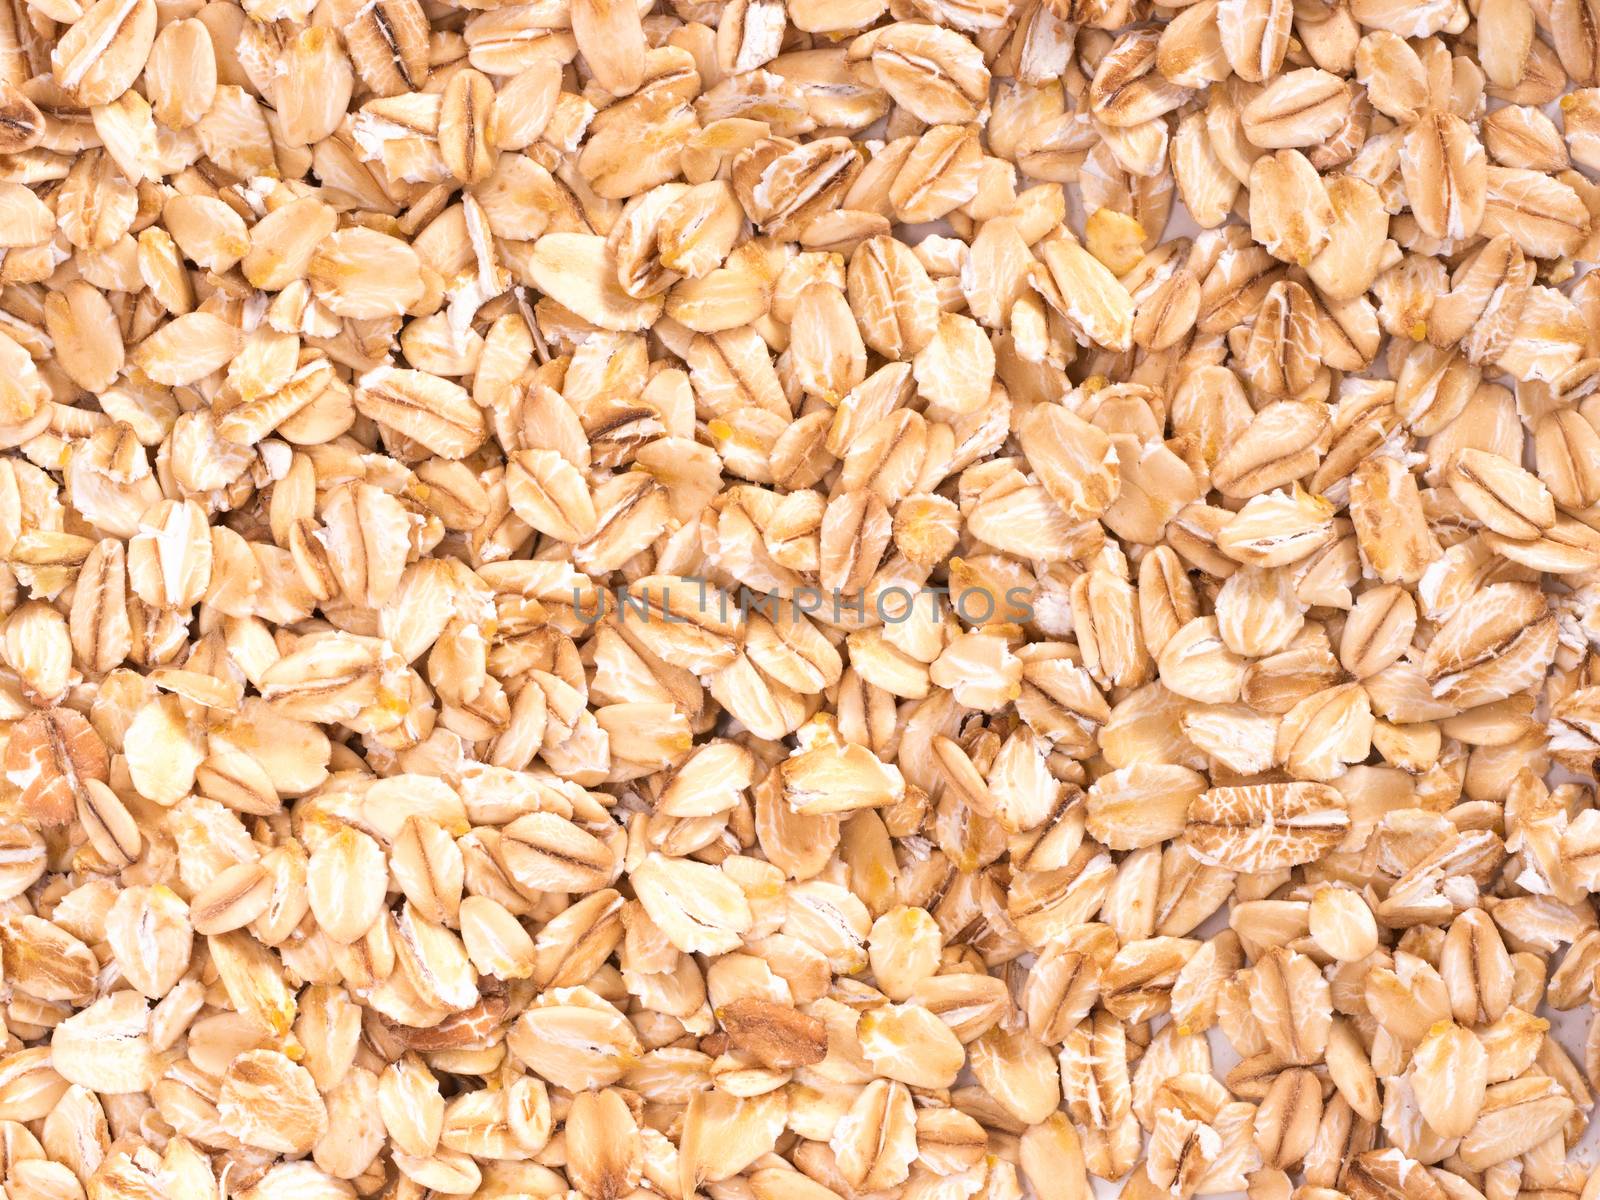 oatmeal texture as background. Flat lay or top view